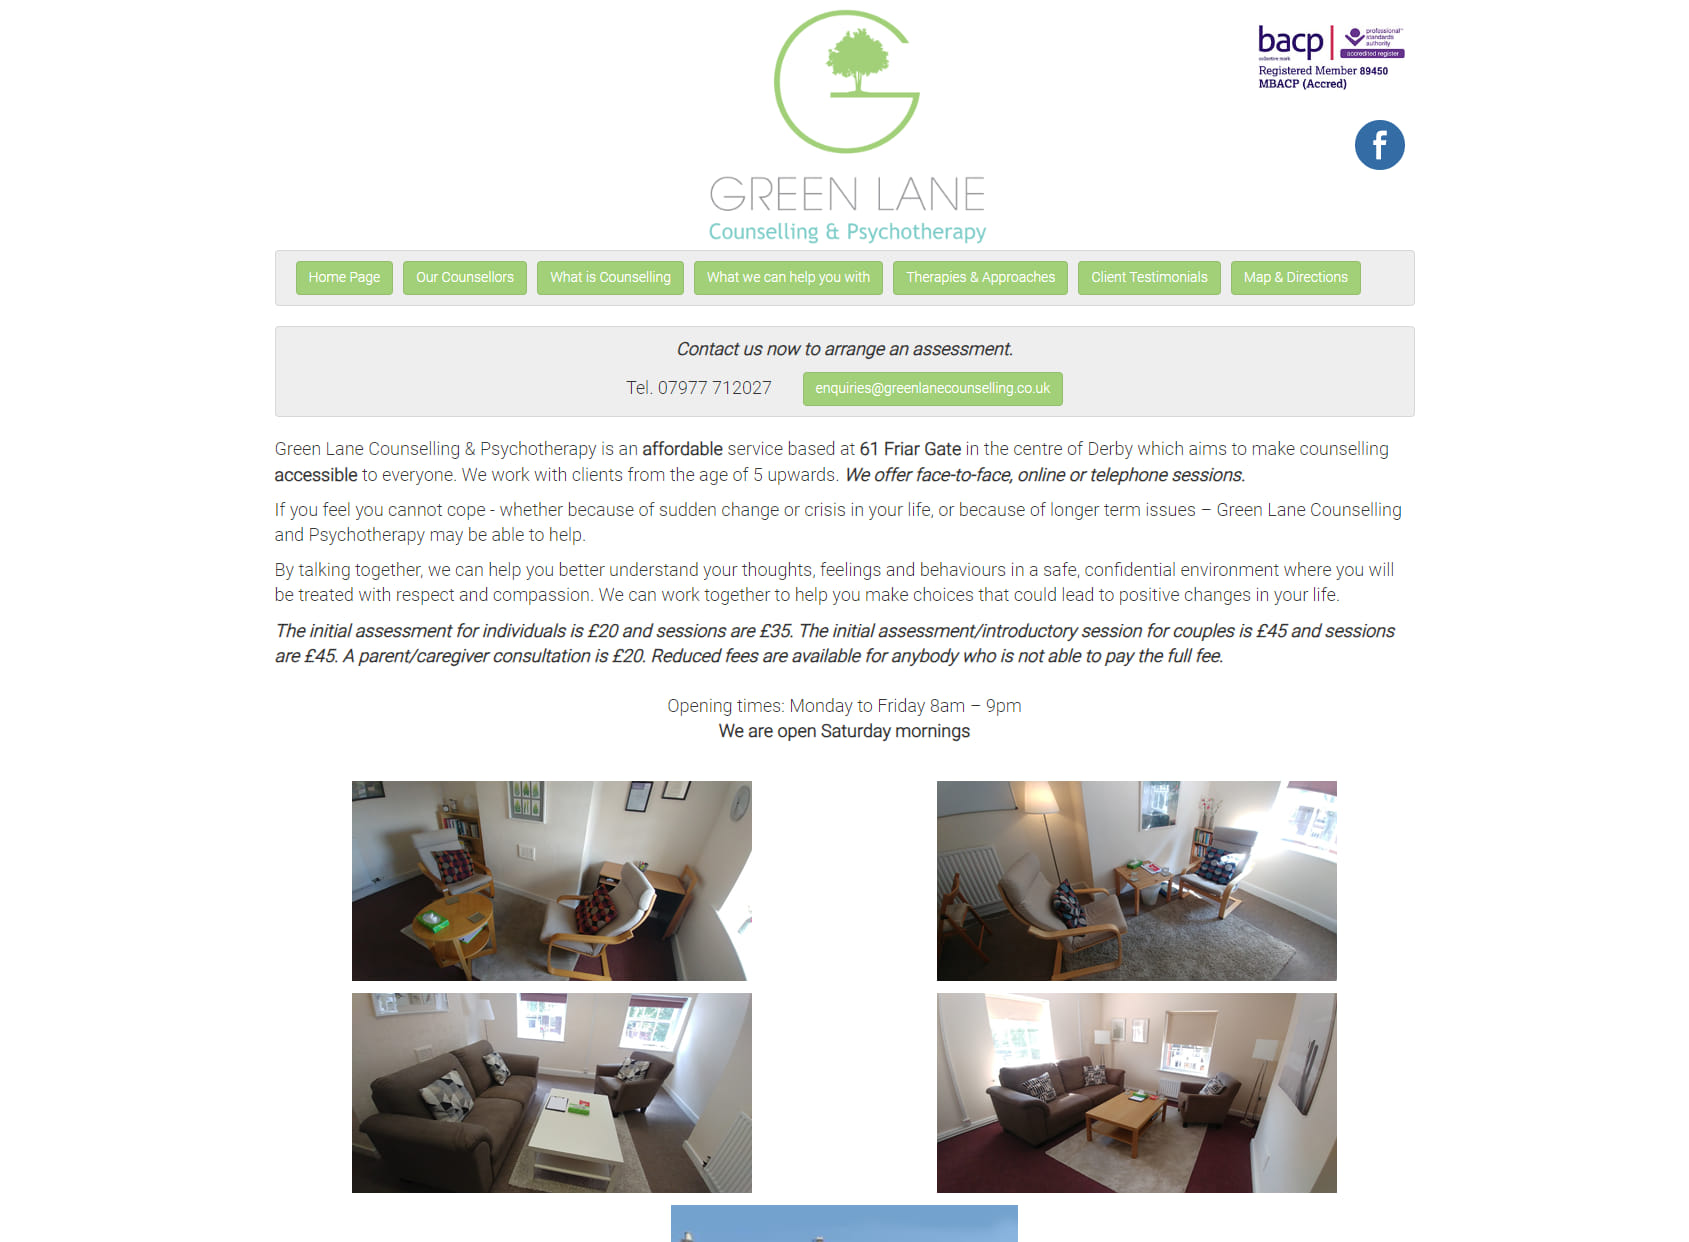 Green Lane Counselling & Psychotherapy